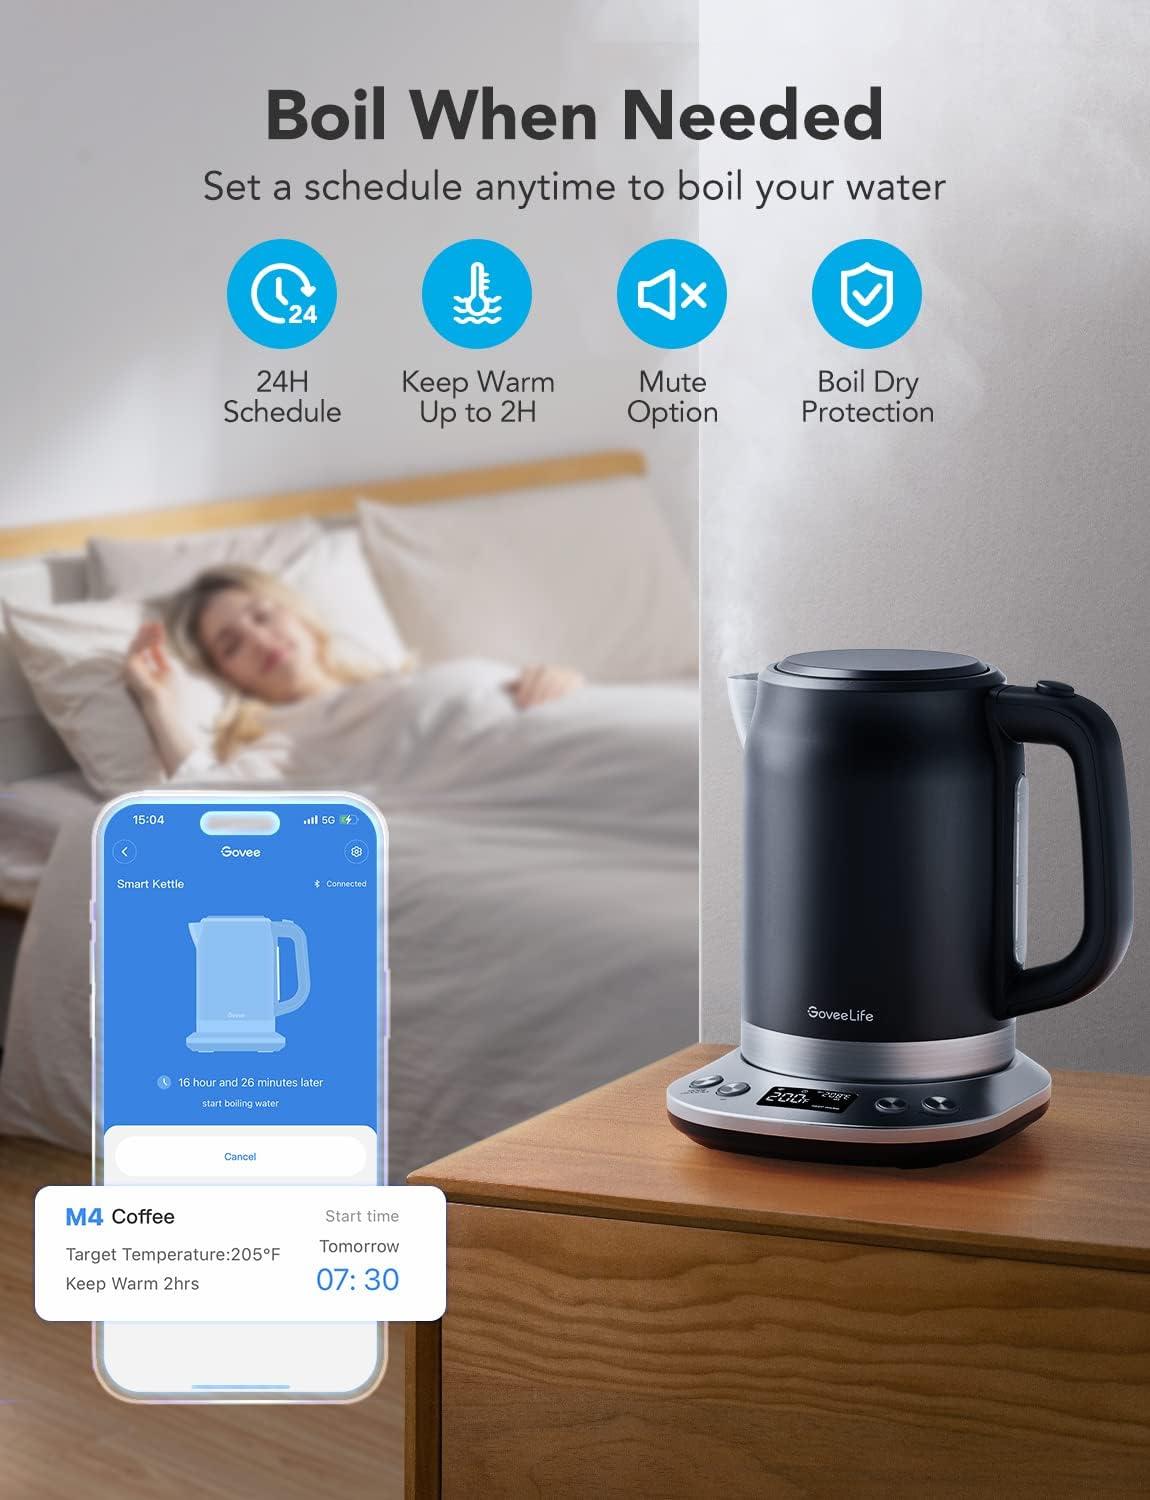 GoveeLife Smart Electric Kettle, 0.8L WiFi Gooseneck Kettle Compatible with Alexa, 5 Modes for Use, 3-Minute Fast Heating and 2H Keep Warm, Auto-Shut